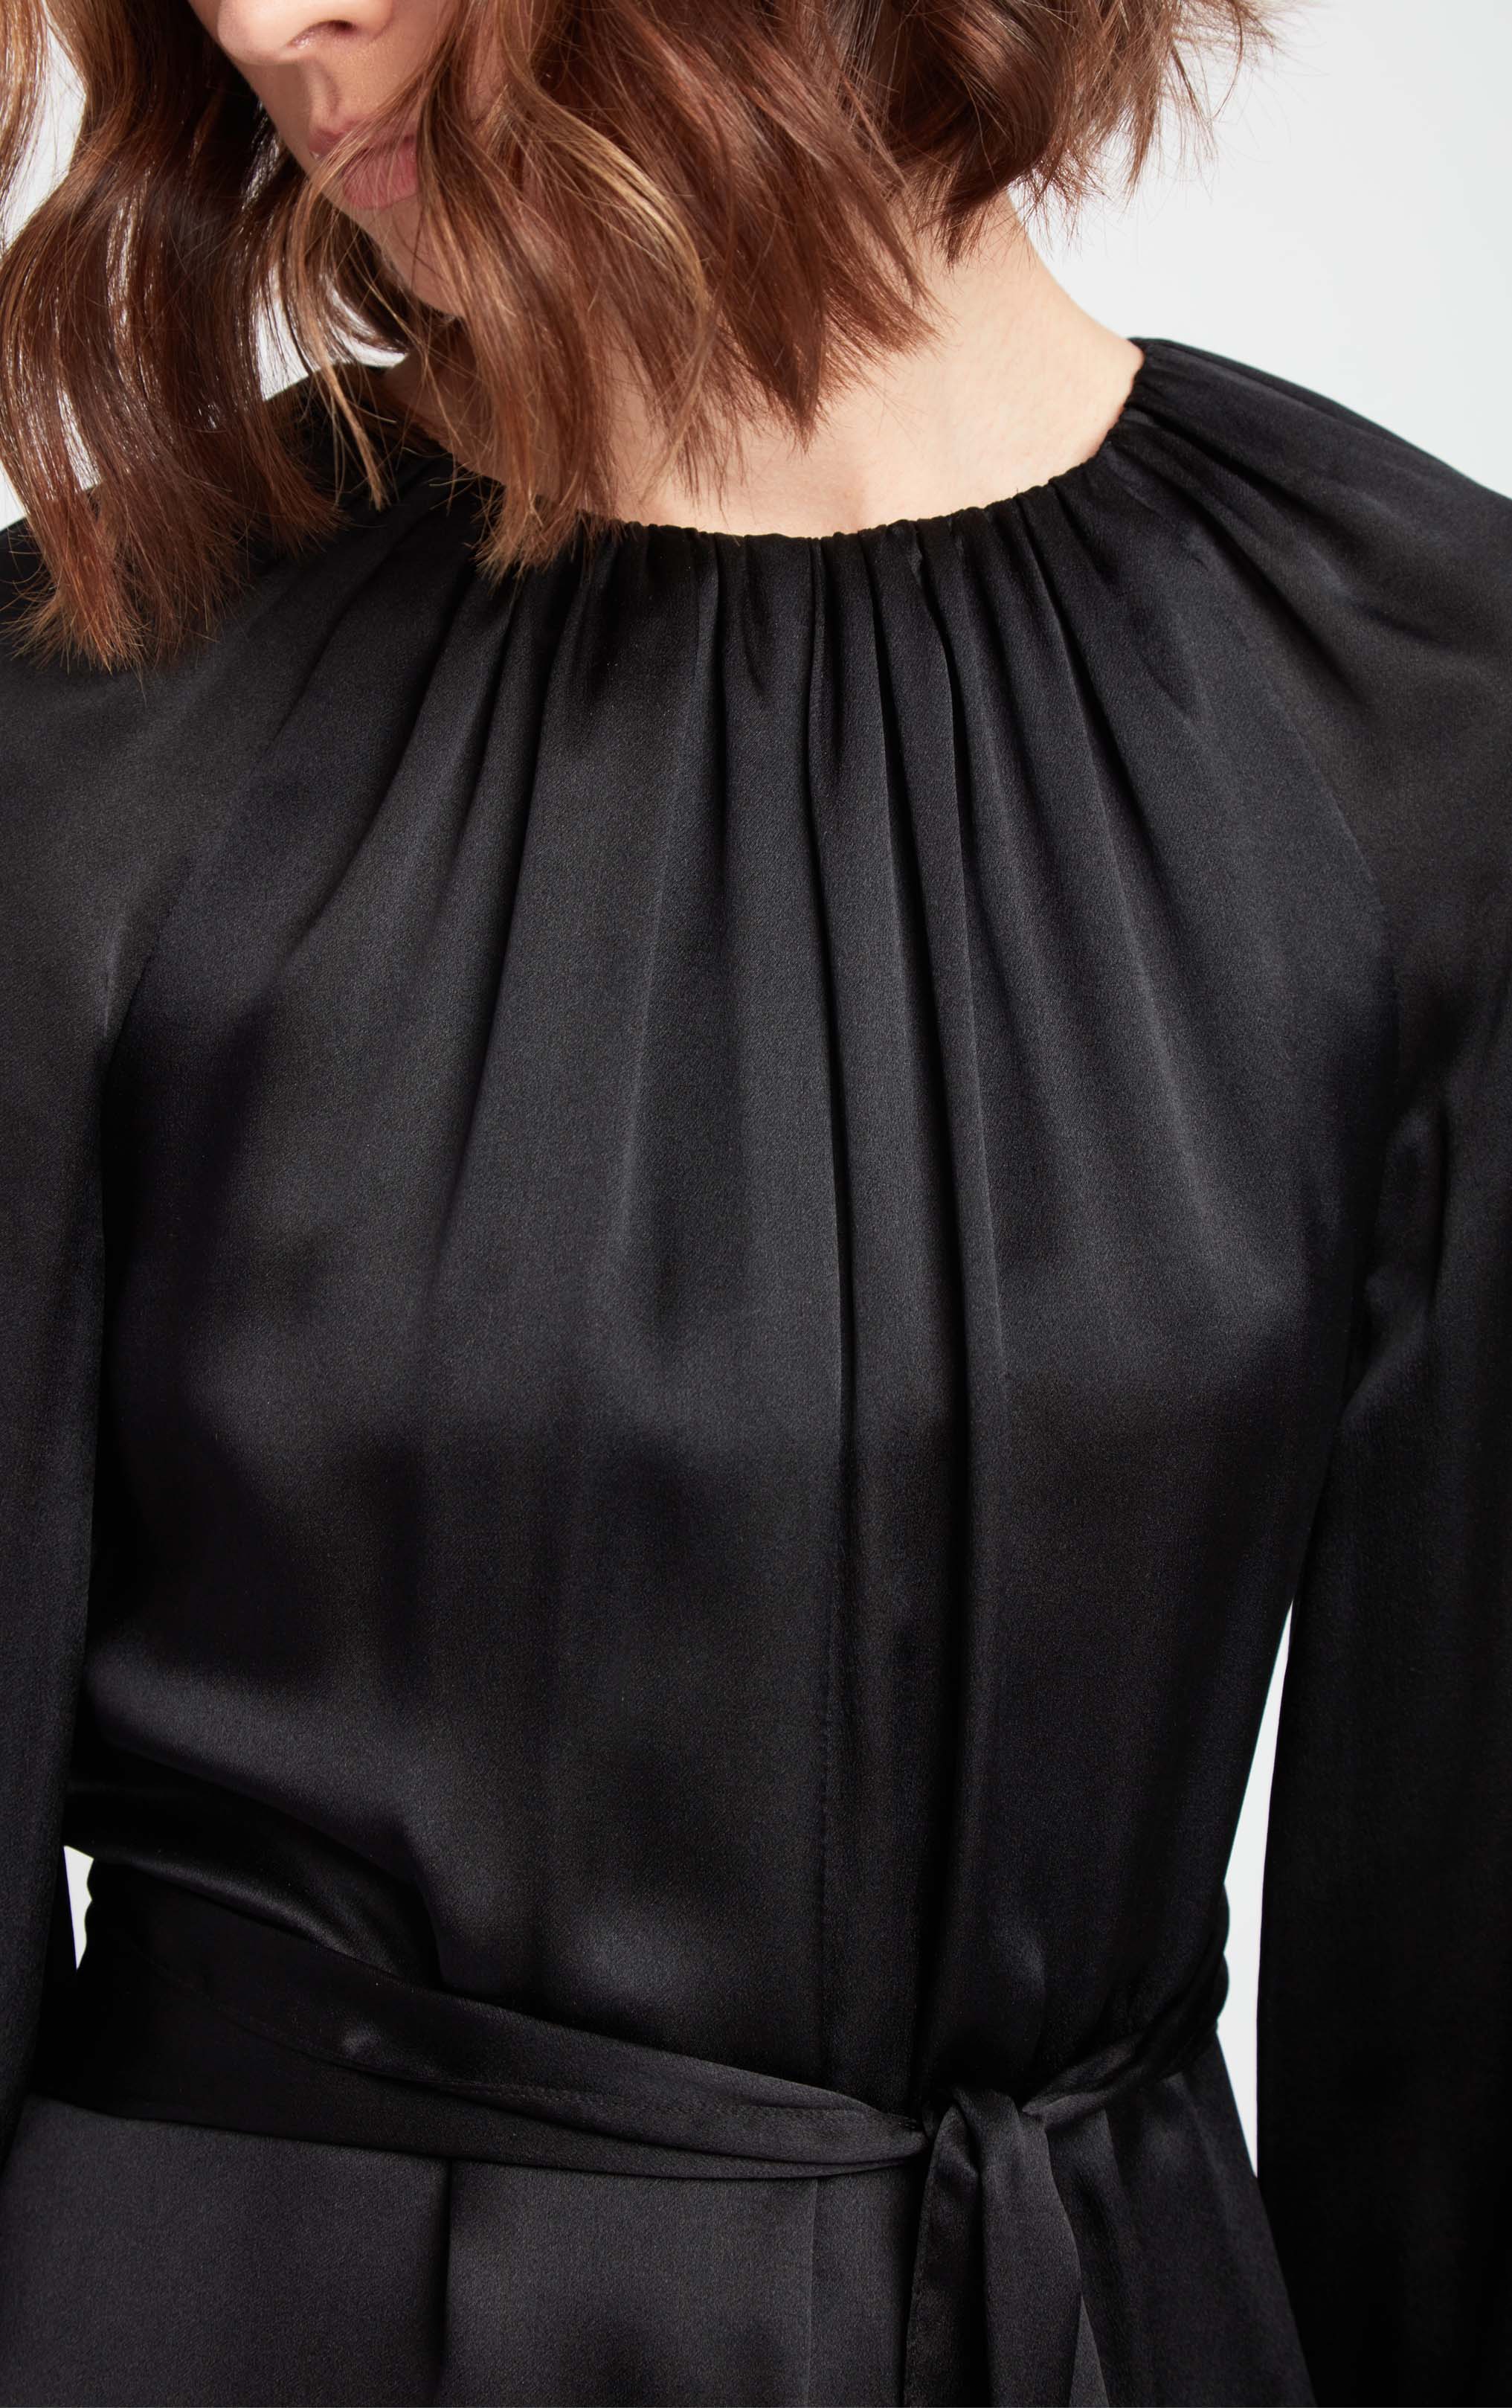 close up view of woman wearing black puff sleeve silk dress with rusched neck